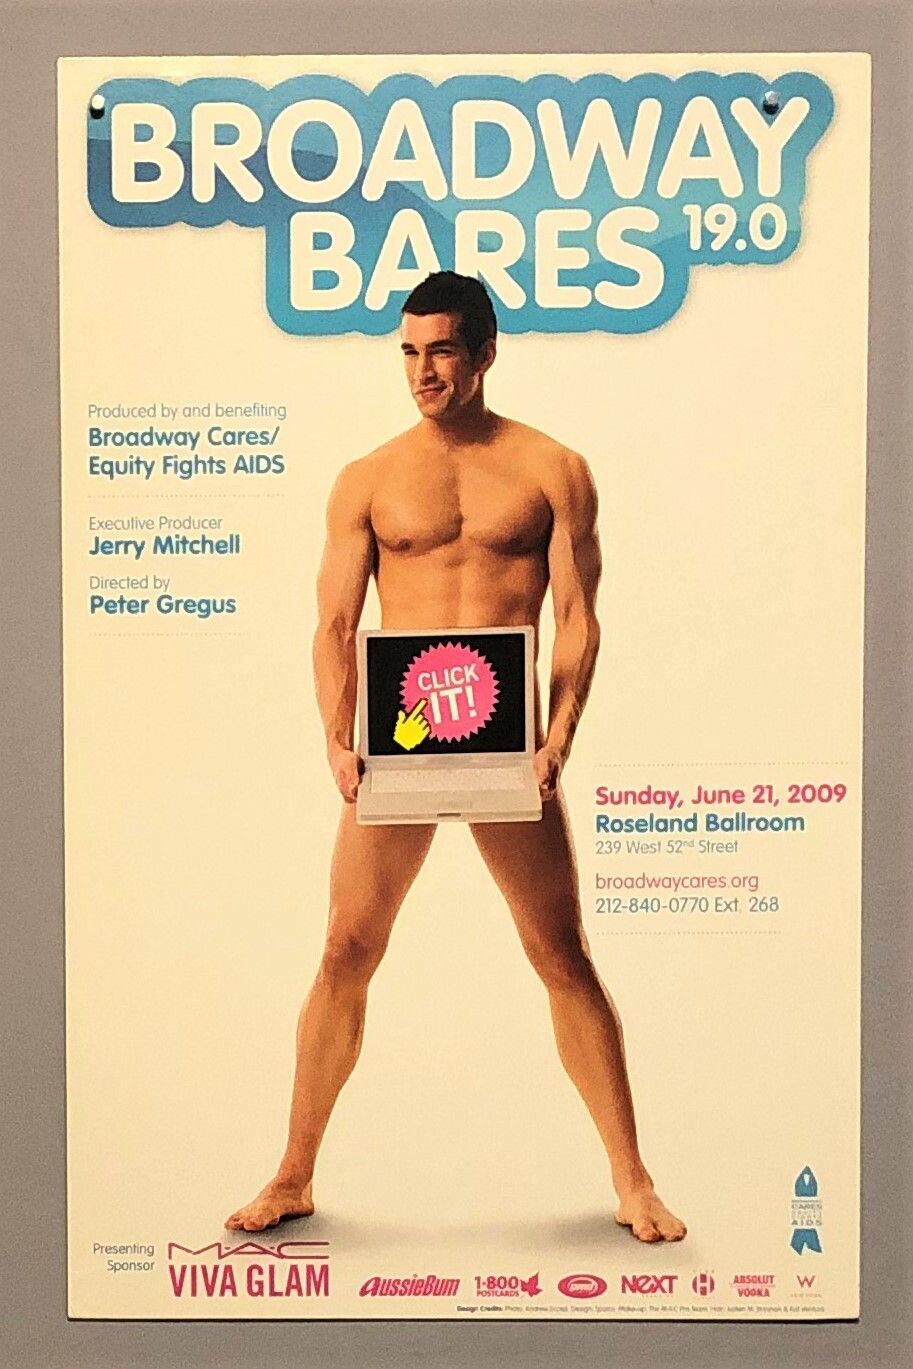 Theater broadway bares 2009